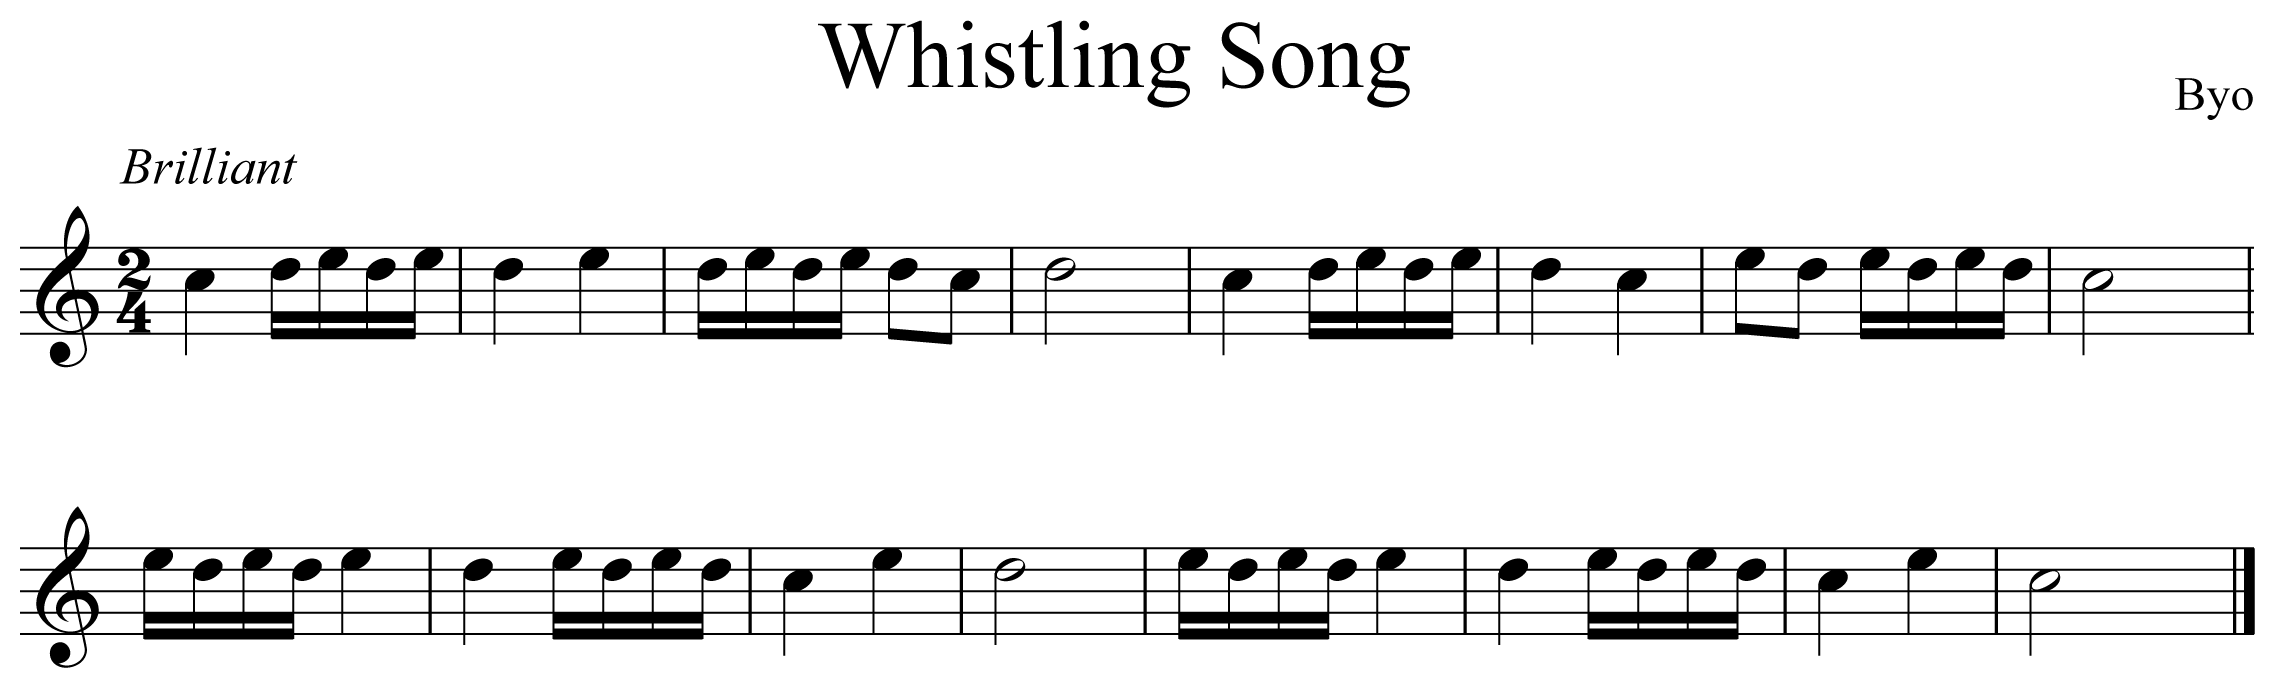 Whistling Song Music Notation Saxophone